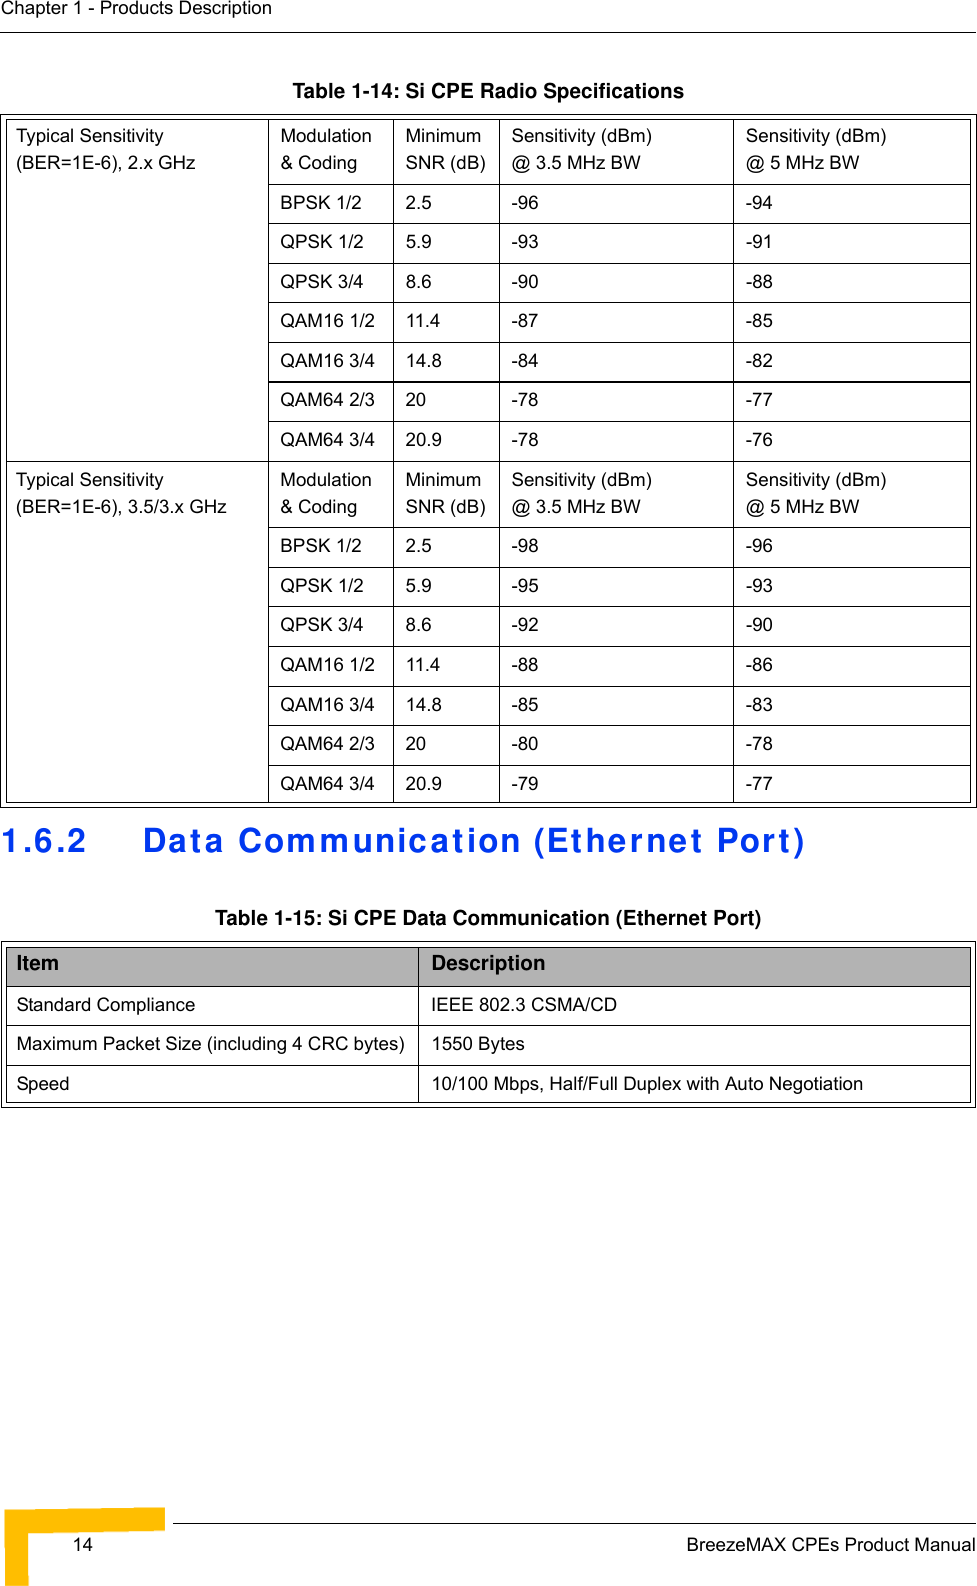 14 BreezeMAX CPEs Product ManualChapter 1 - Products Description1.6.2 Data Communication (Ethernet Port)Typical Sensitivity (BER=1E-6), 2.x GHzModulation &amp; CodingMinimum SNR (dB)Sensitivity (dBm)  @ 3.5 MHz BWSensitivity (dBm)  @ 5 MHz BWBPSK 1/2 2.5 -96 -94QPSK 1/2 5.9 -93 -91QPSK 3/4 8.6 -90 -88QAM16 1/2 11.4 -87 -85QAM16 3/4 14.8 -84 -82QAM64 2/3 20 -78 -77QAM64 3/4 20.9 -78 -76Typical Sensitivity (BER=1E-6), 3.5/3.x GHzModulation &amp; CodingMinimum SNR (dB)Sensitivity (dBm)  @ 3.5 MHz BWSensitivity (dBm)  @ 5 MHz BWBPSK 1/2 2.5 -98 -96QPSK 1/2 5.9 -95 -93QPSK 3/4 8.6 -92 -90QAM16 1/2 11.4 -88 -86QAM16 3/4 14.8 -85 -83QAM64 2/3 20 -80 -78QAM64 3/4 20.9 -79 -77Table 1-15: Si CPE Data Communication (Ethernet Port)Item DescriptionStandard Compliance IEEE 802.3 CSMA/CDMaximum Packet Size (including 4 CRC bytes) 1550 BytesSpeed 10/100 Mbps, Half/Full Duplex with Auto NegotiationTable 1-14: Si CPE Radio Specifications